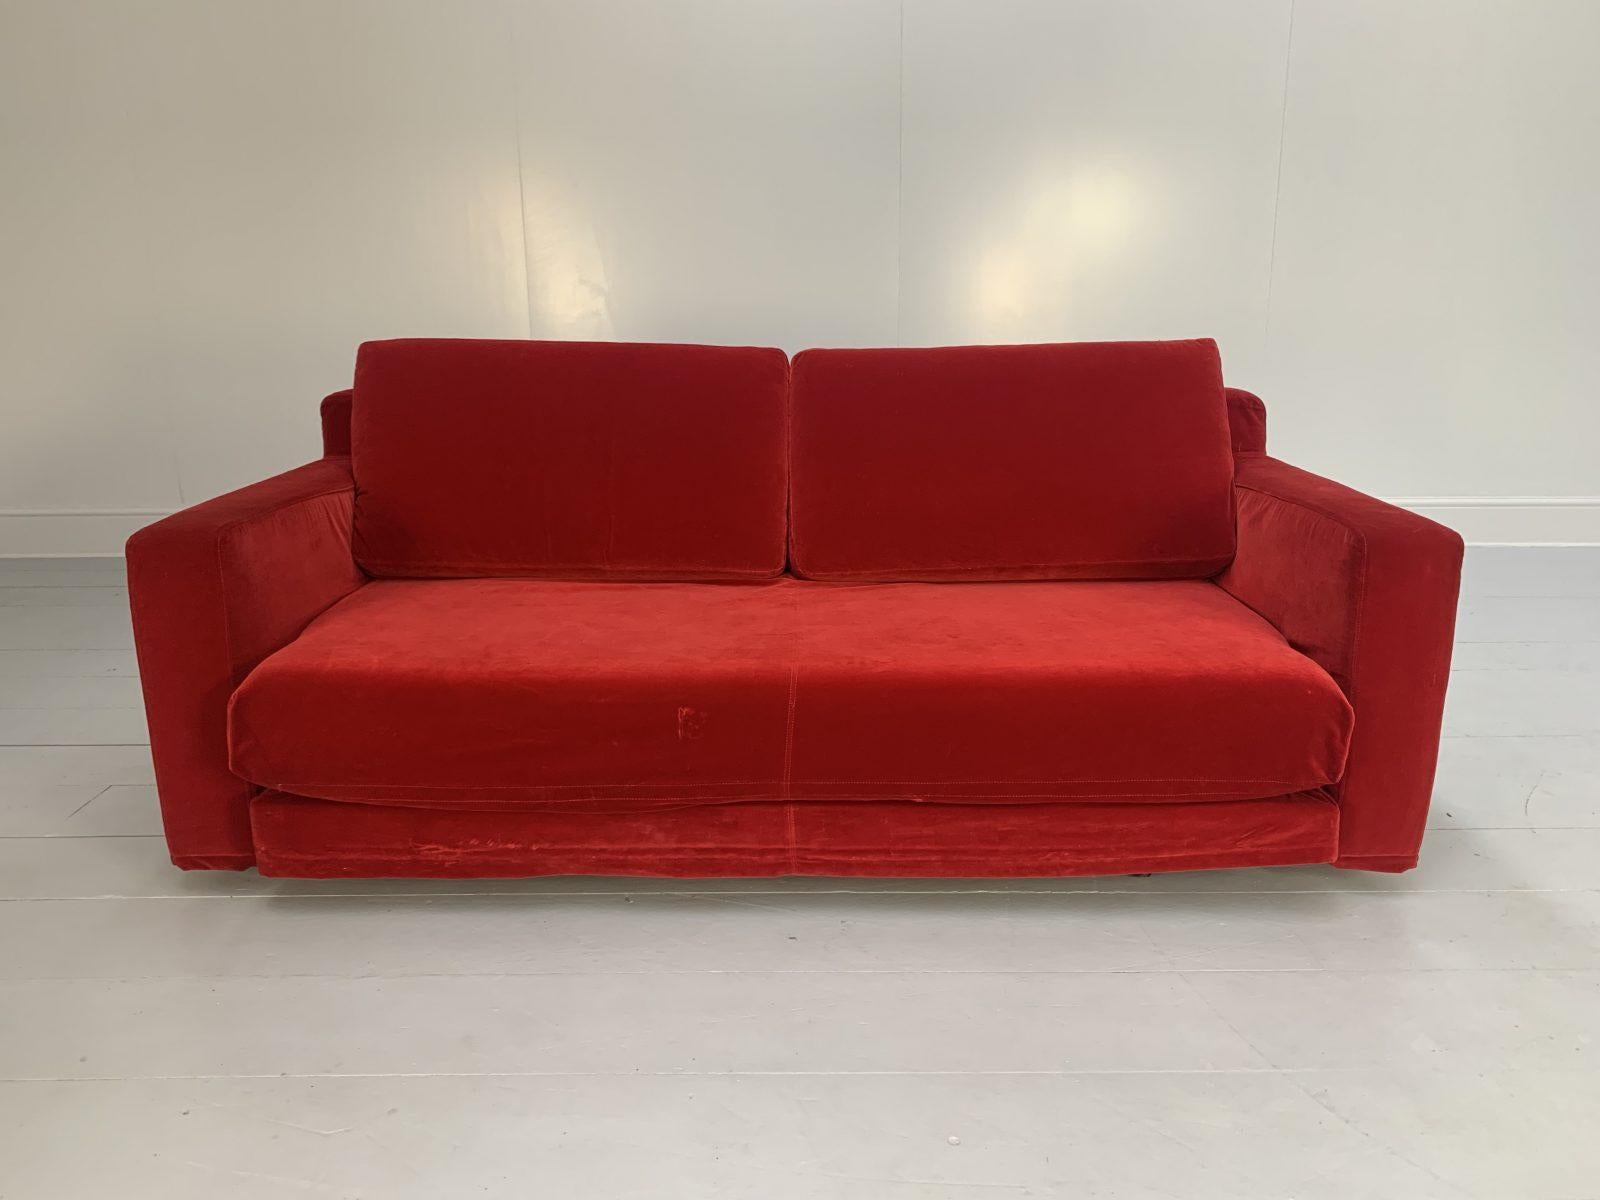 This is a superb, sensationally-proportioned “Winny COD 10413” 2.5-Seat (Double) Sofa-Bed from the world renown Italian furniture house, Flexform.

In a world of temporary pleasures, Flexform create beautiful furniture that remains a joy